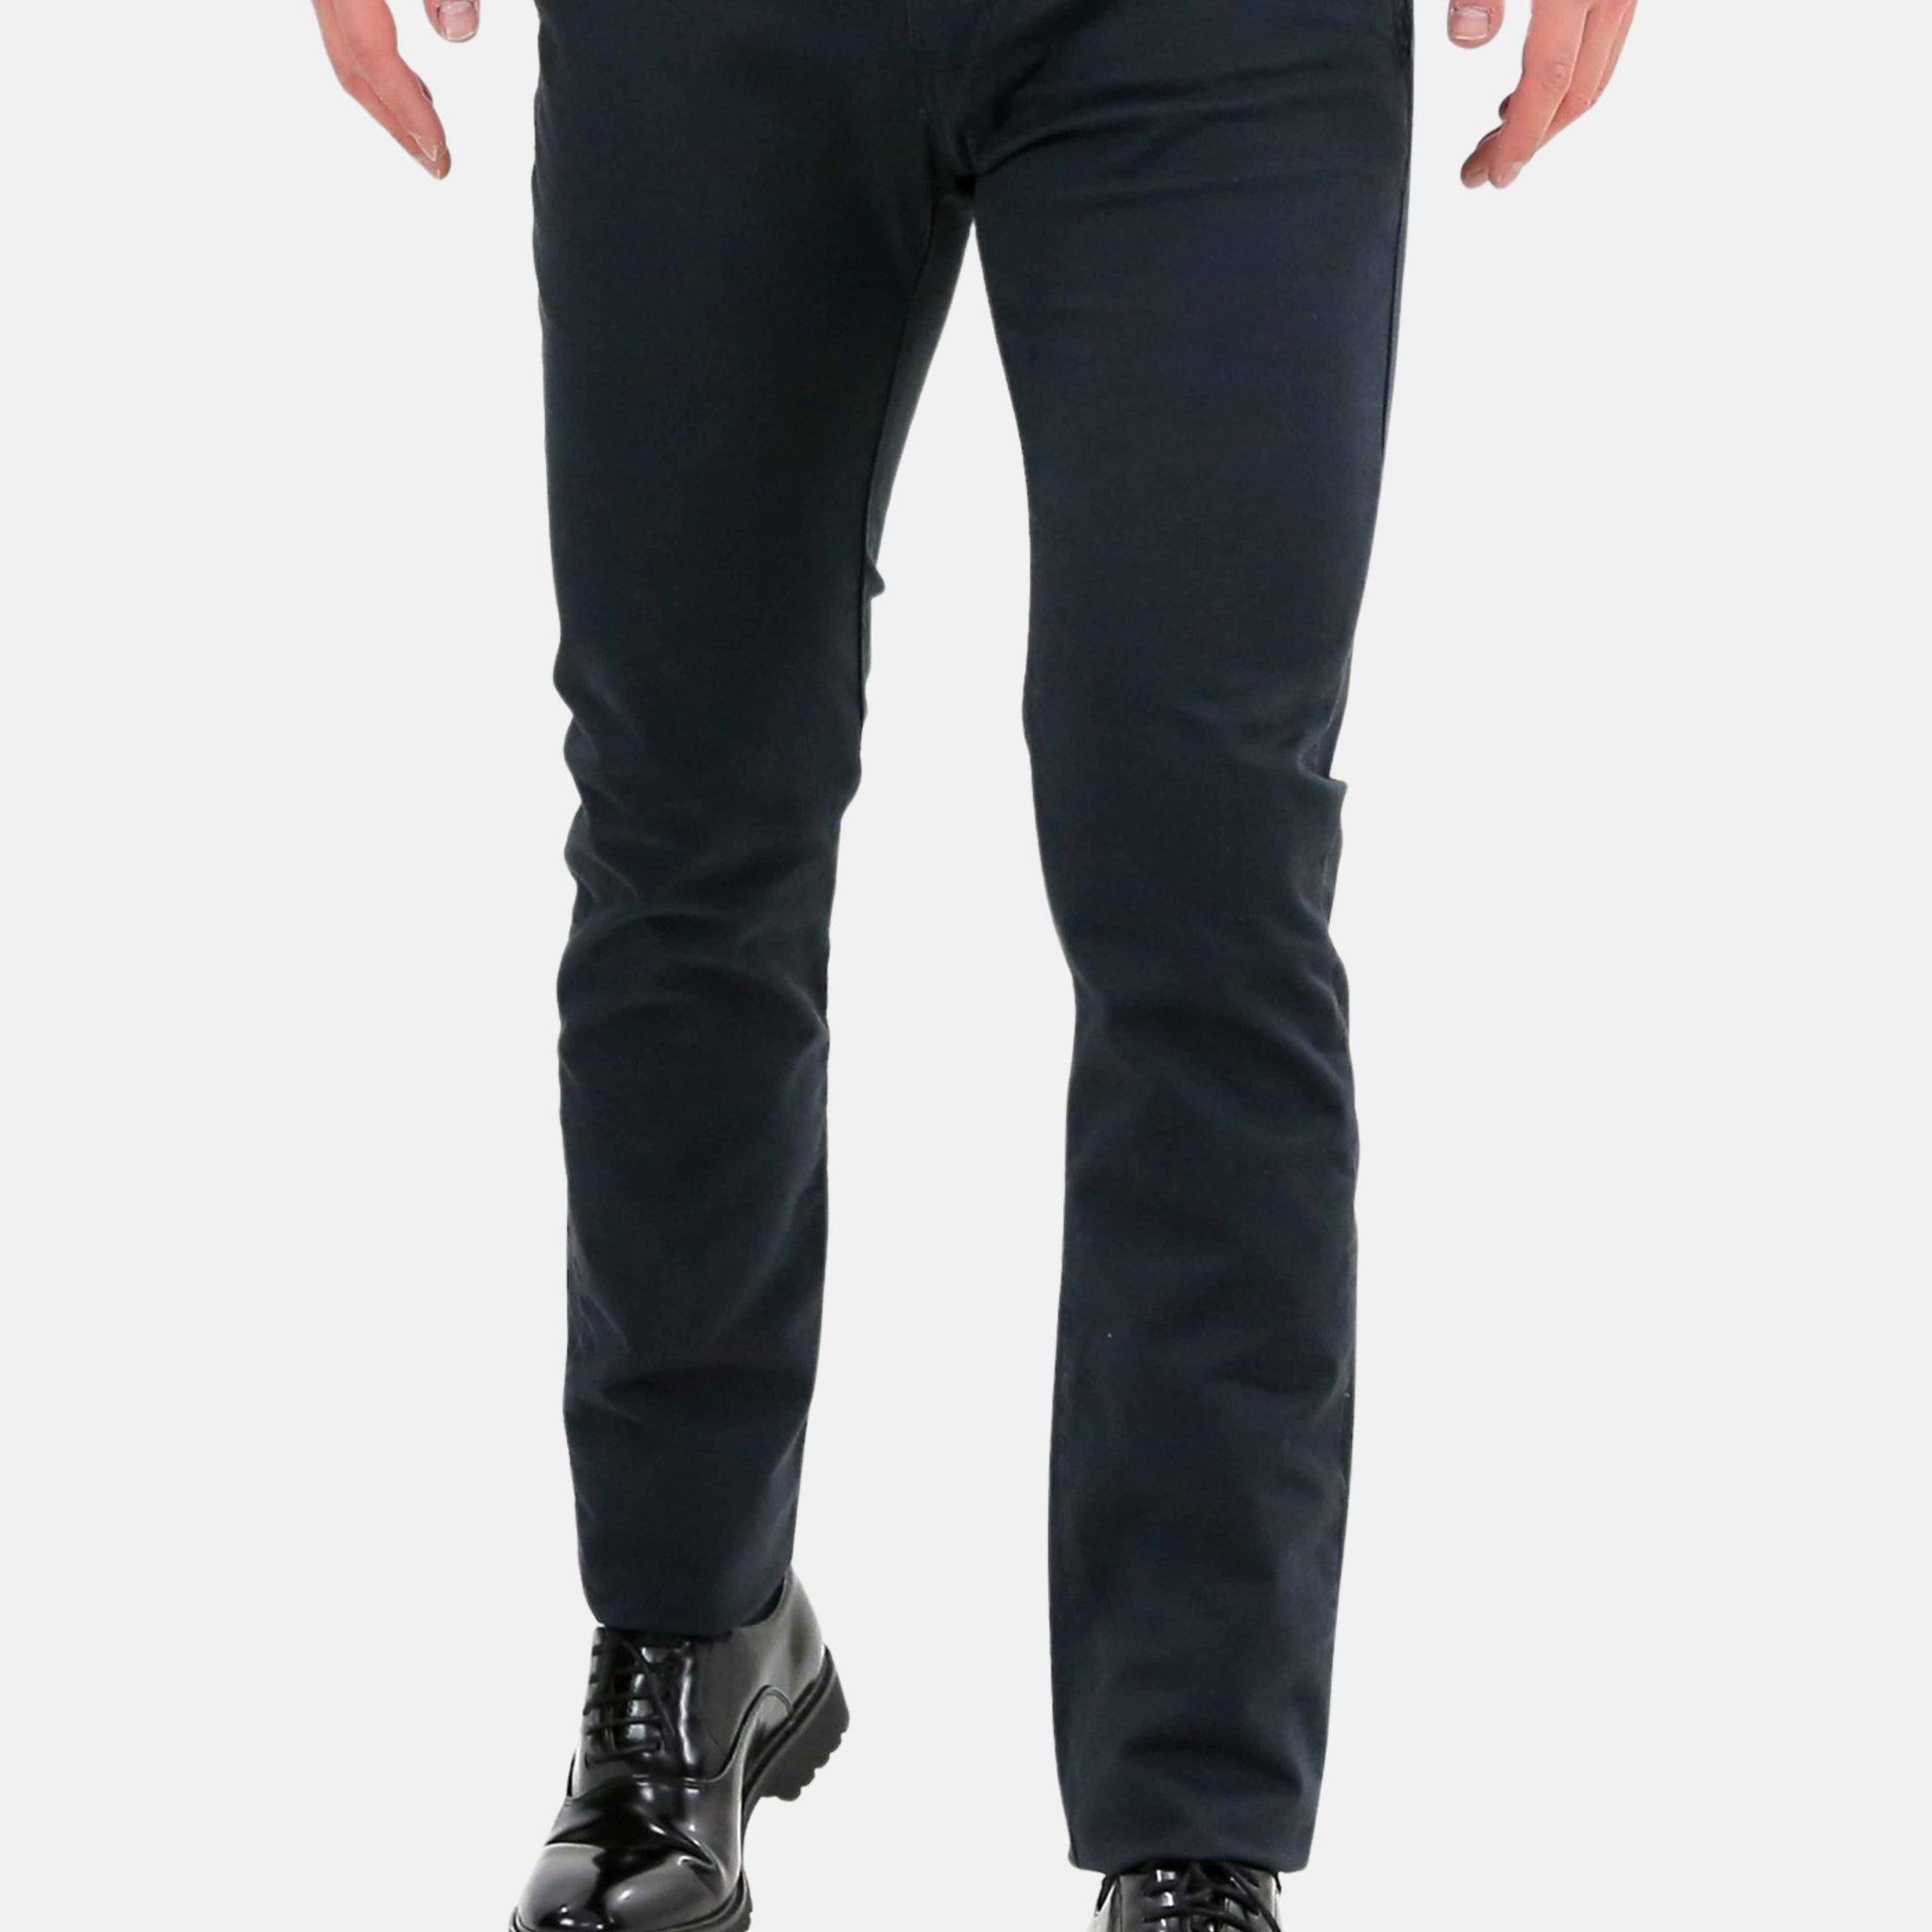 Regular trousers in warm cotton